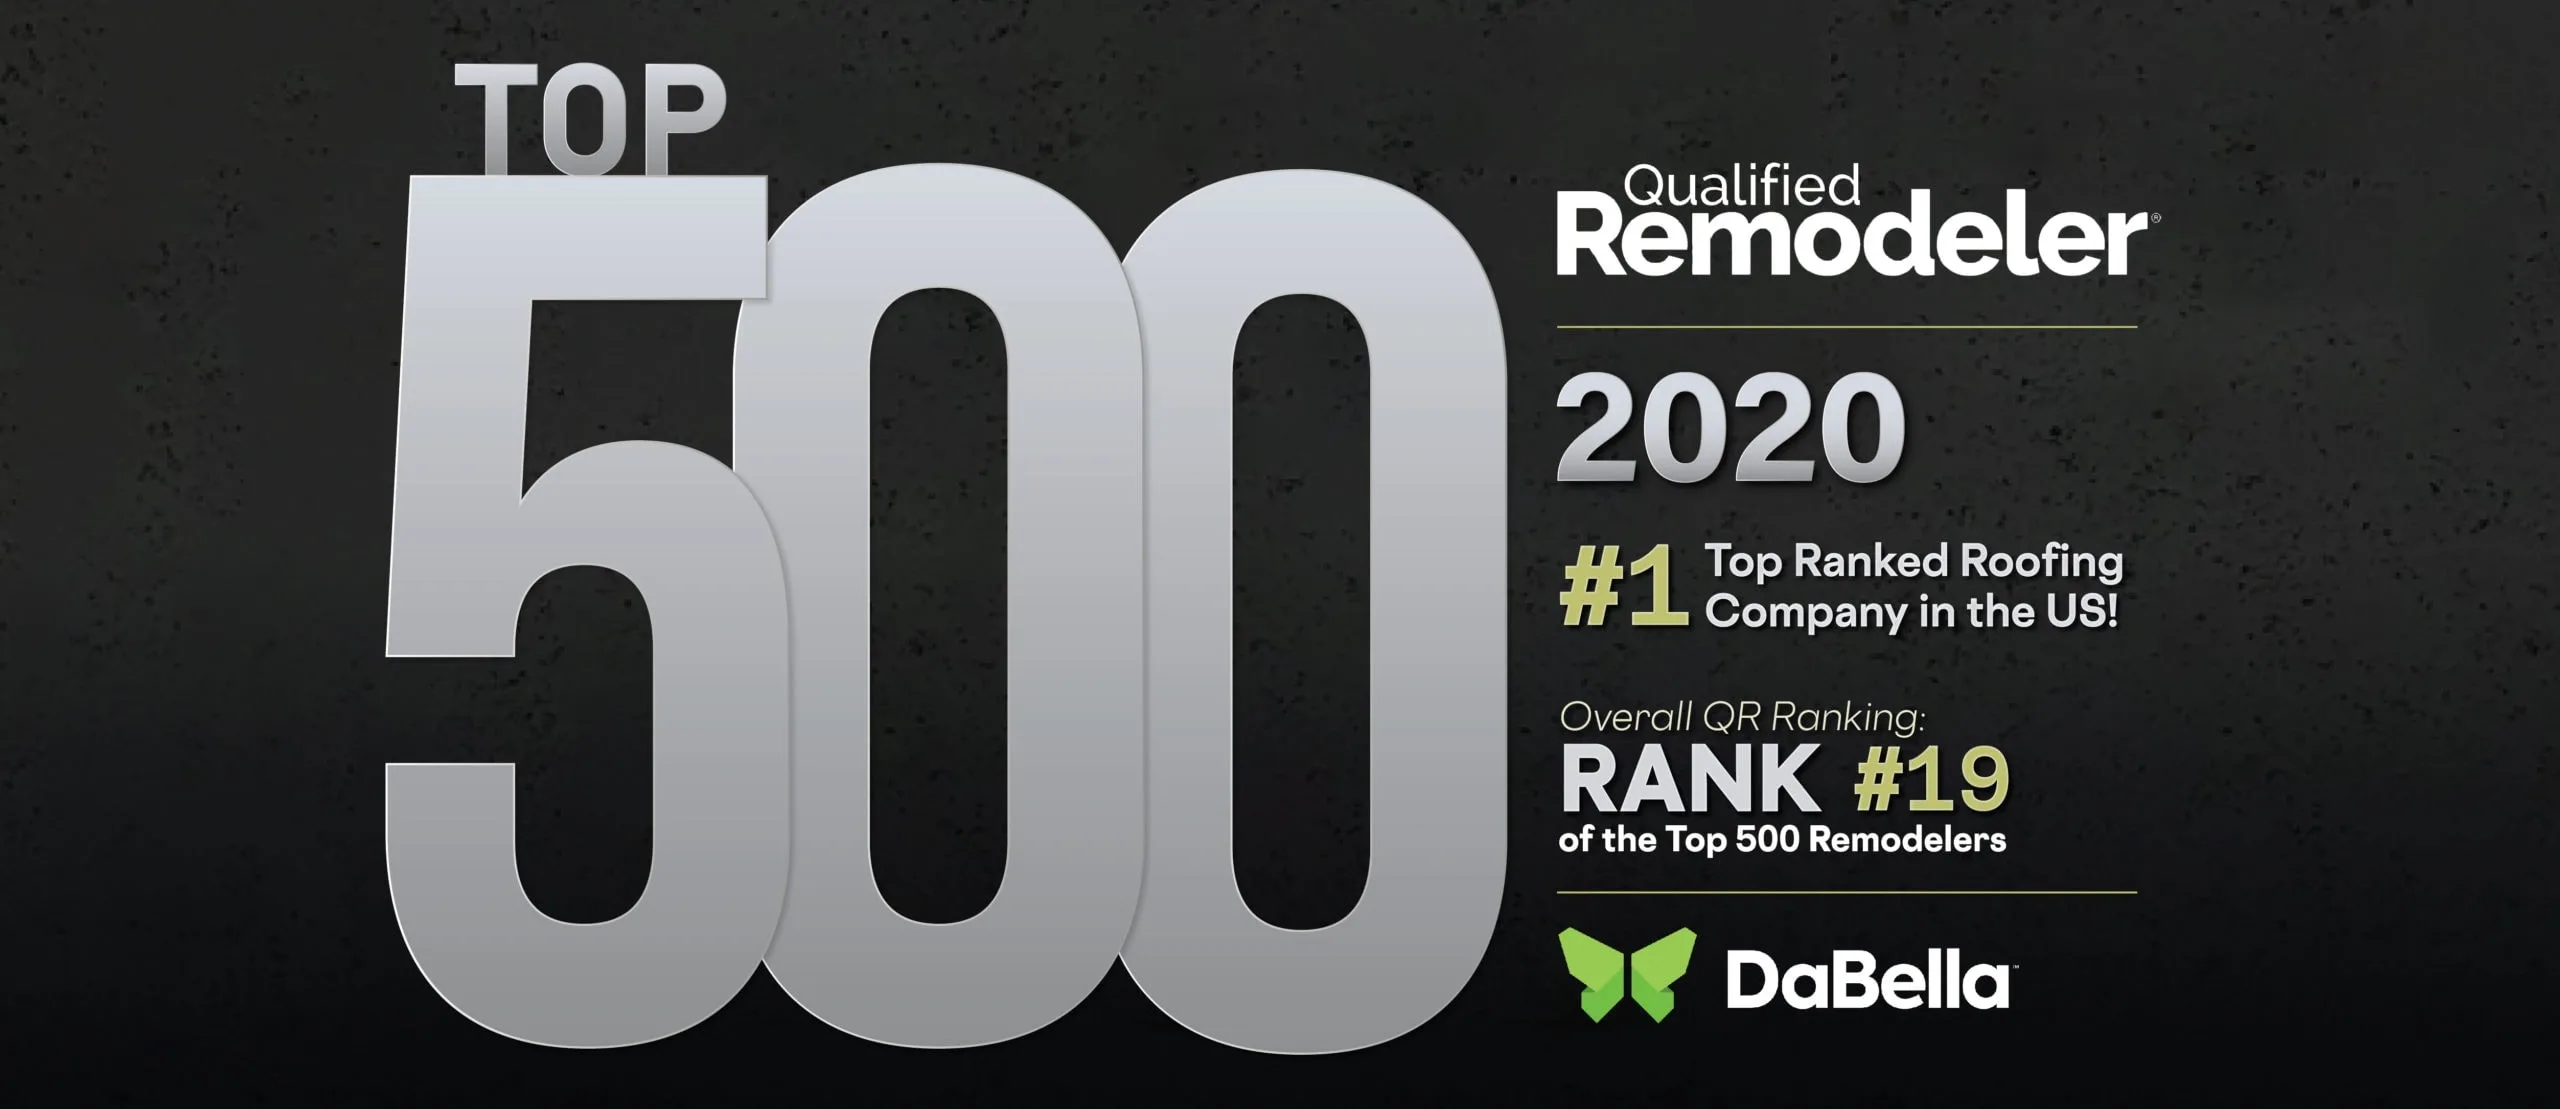 DaBella Named Top Roofing Company in US